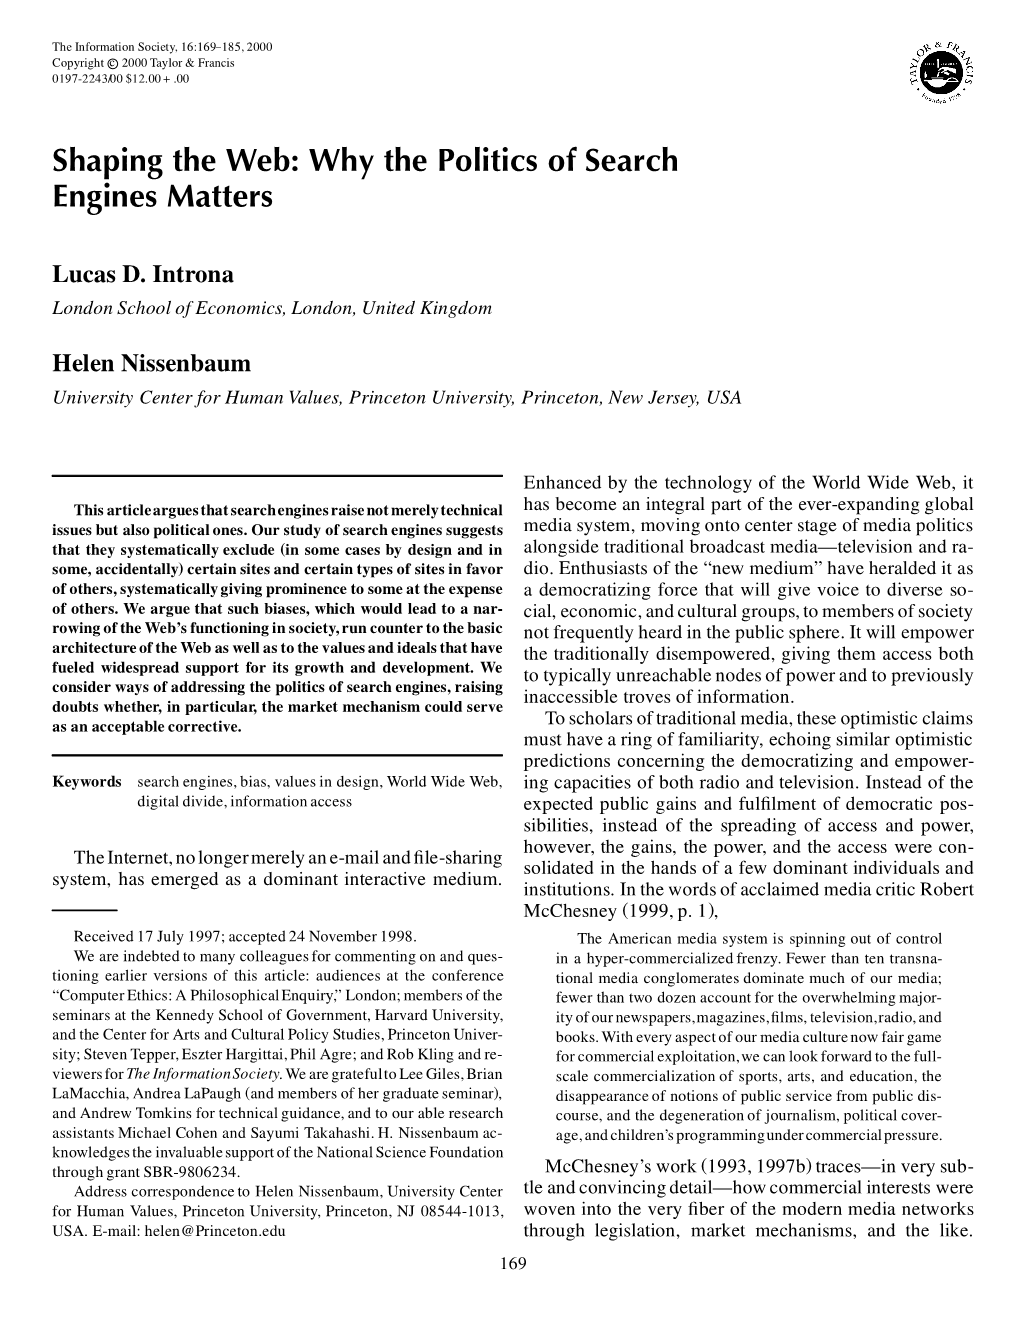 Shaping the Web: Why the Politics of Search Engines Matters